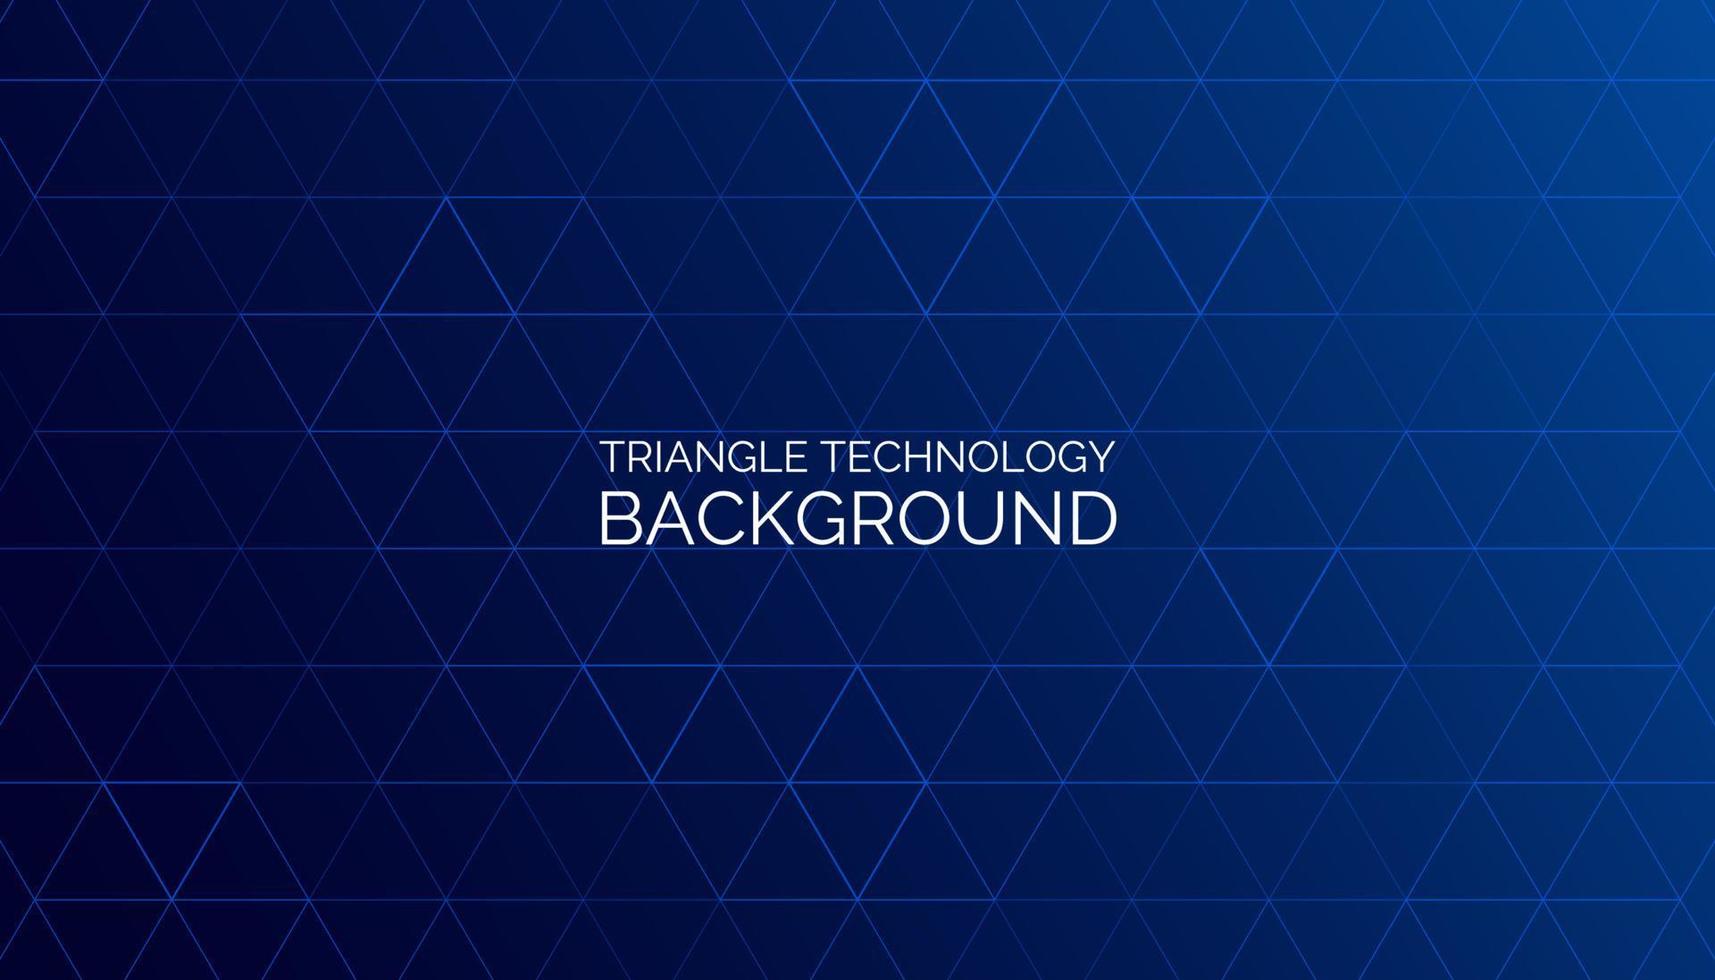 Vector background with a modern triangular pattern in blue color, representing technology and design. Triangular lines mosaic. For advertising, borders, web design, booklets, and covers